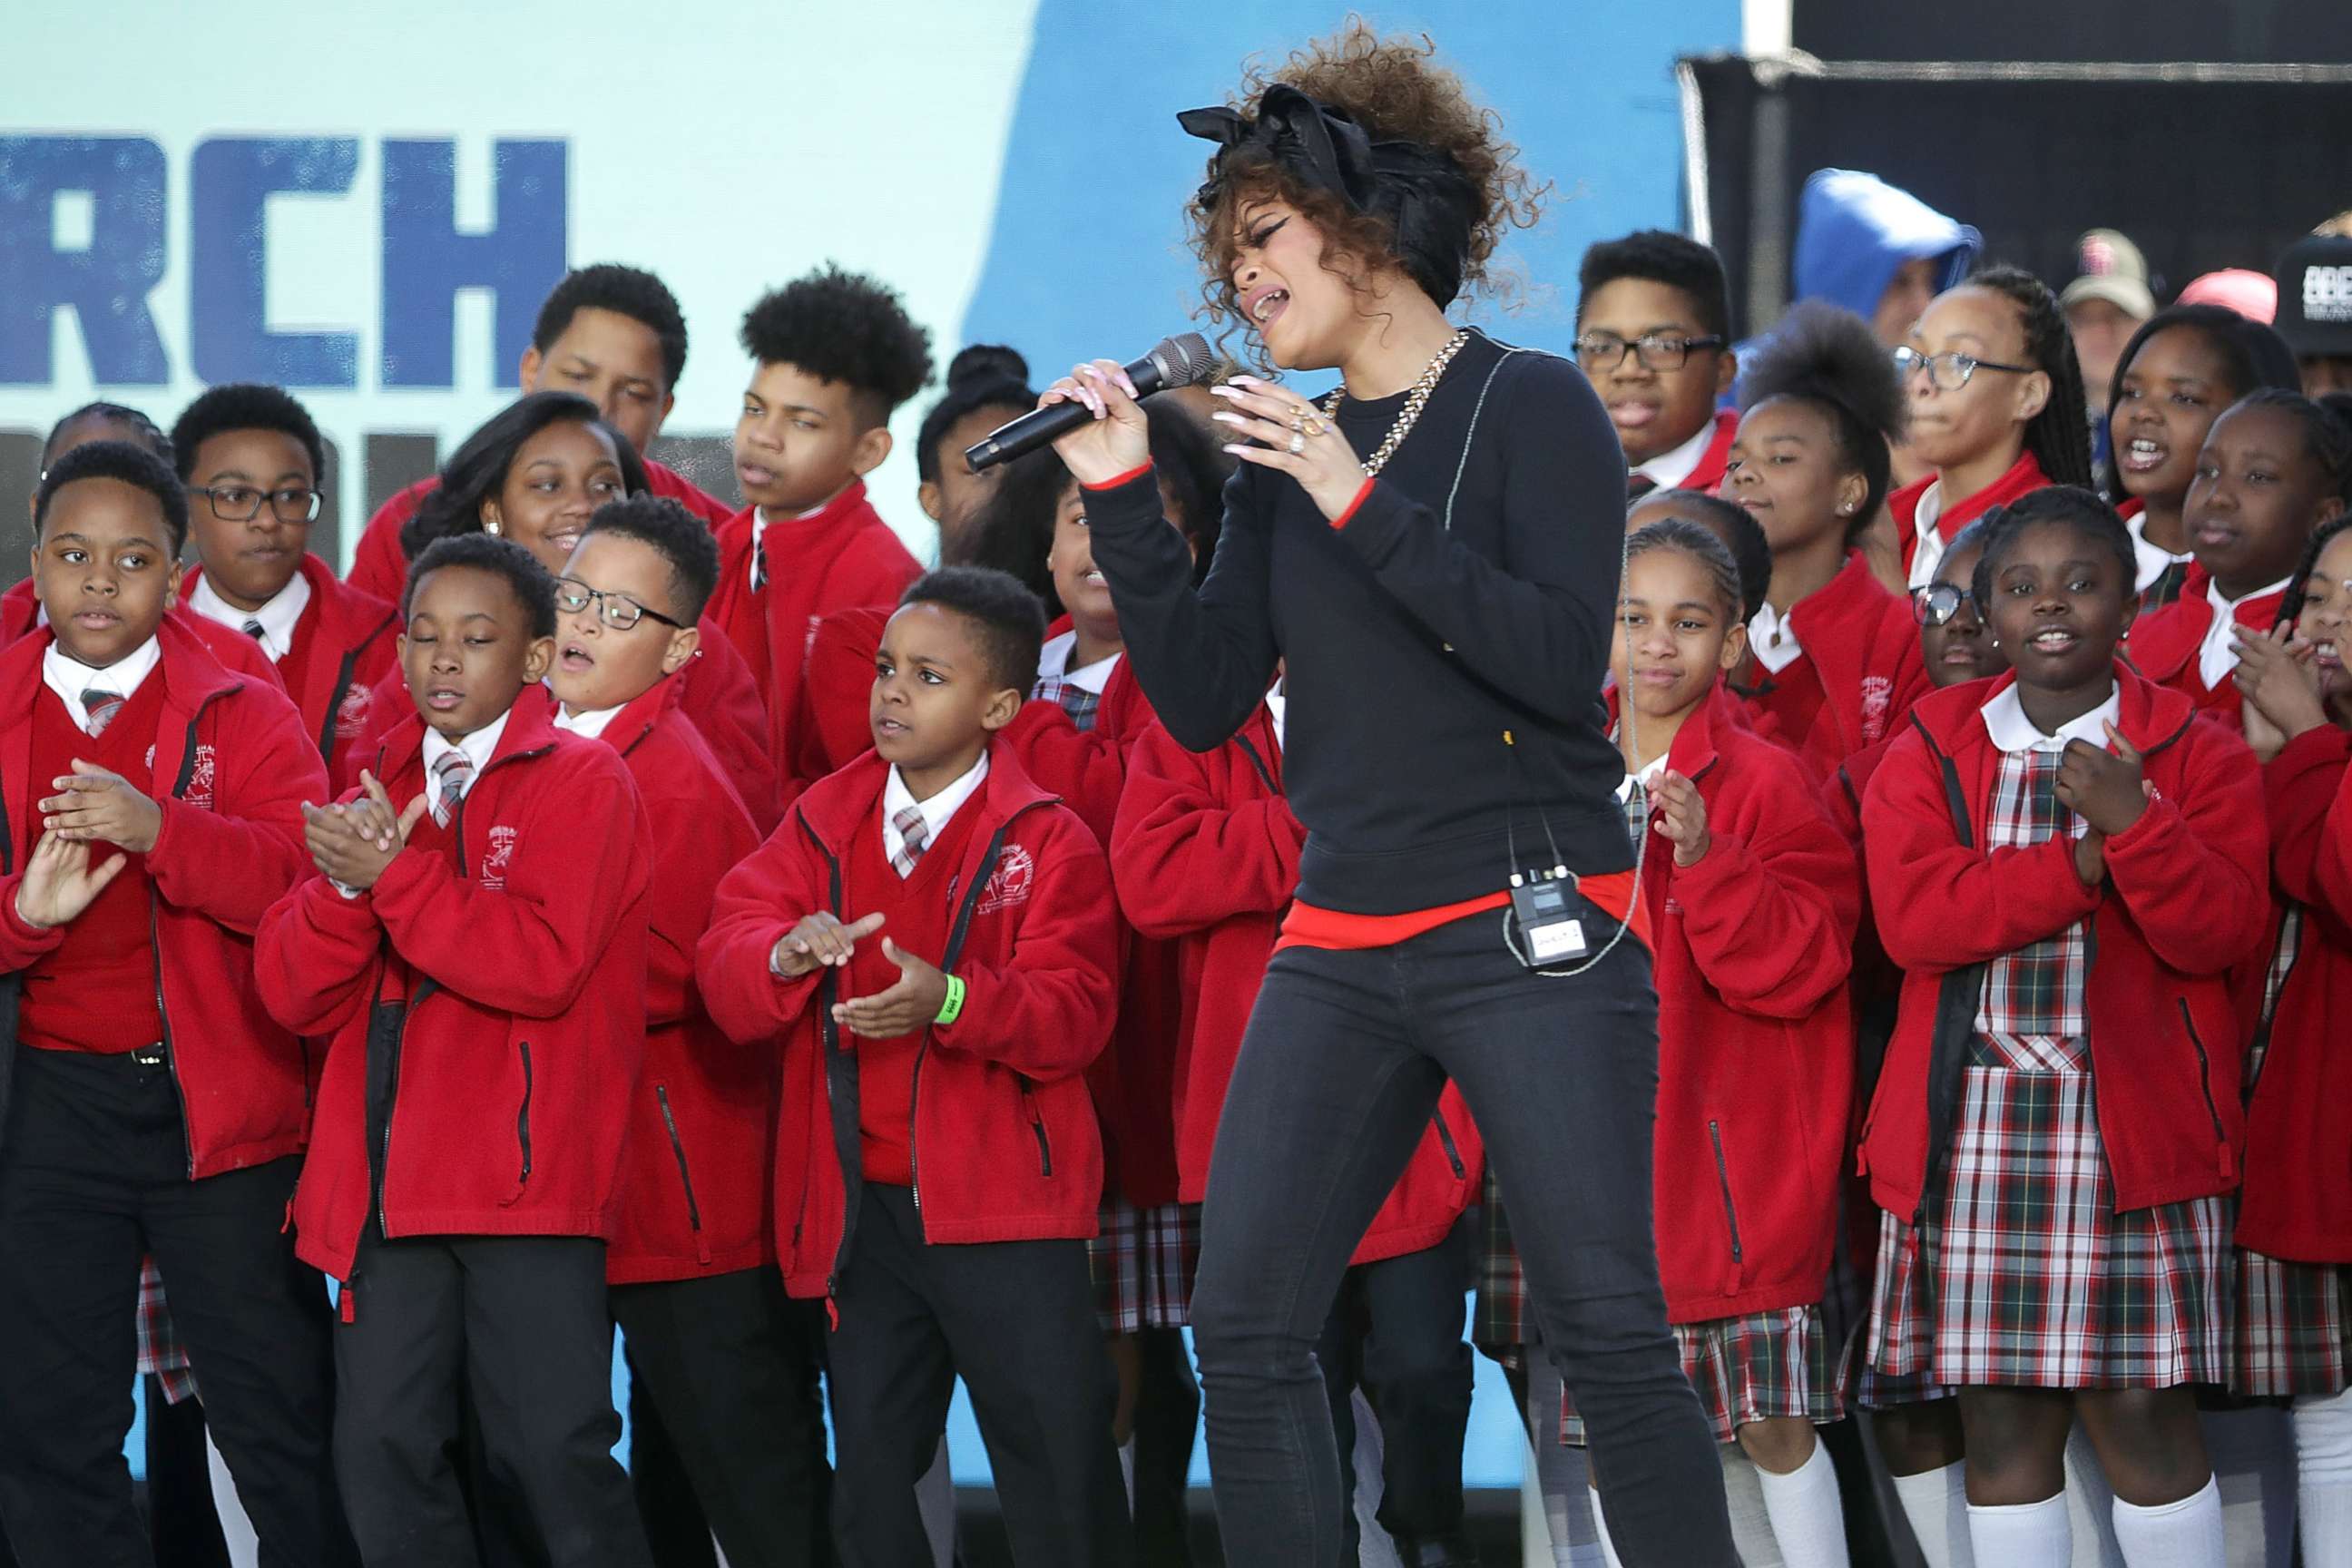 PHOTO: Andra Day performs "Rise Up" with members of the Cardinal Shehan School Choir during the March for Our Lives rally, on March 24, 2018 in Washington, D.C. 